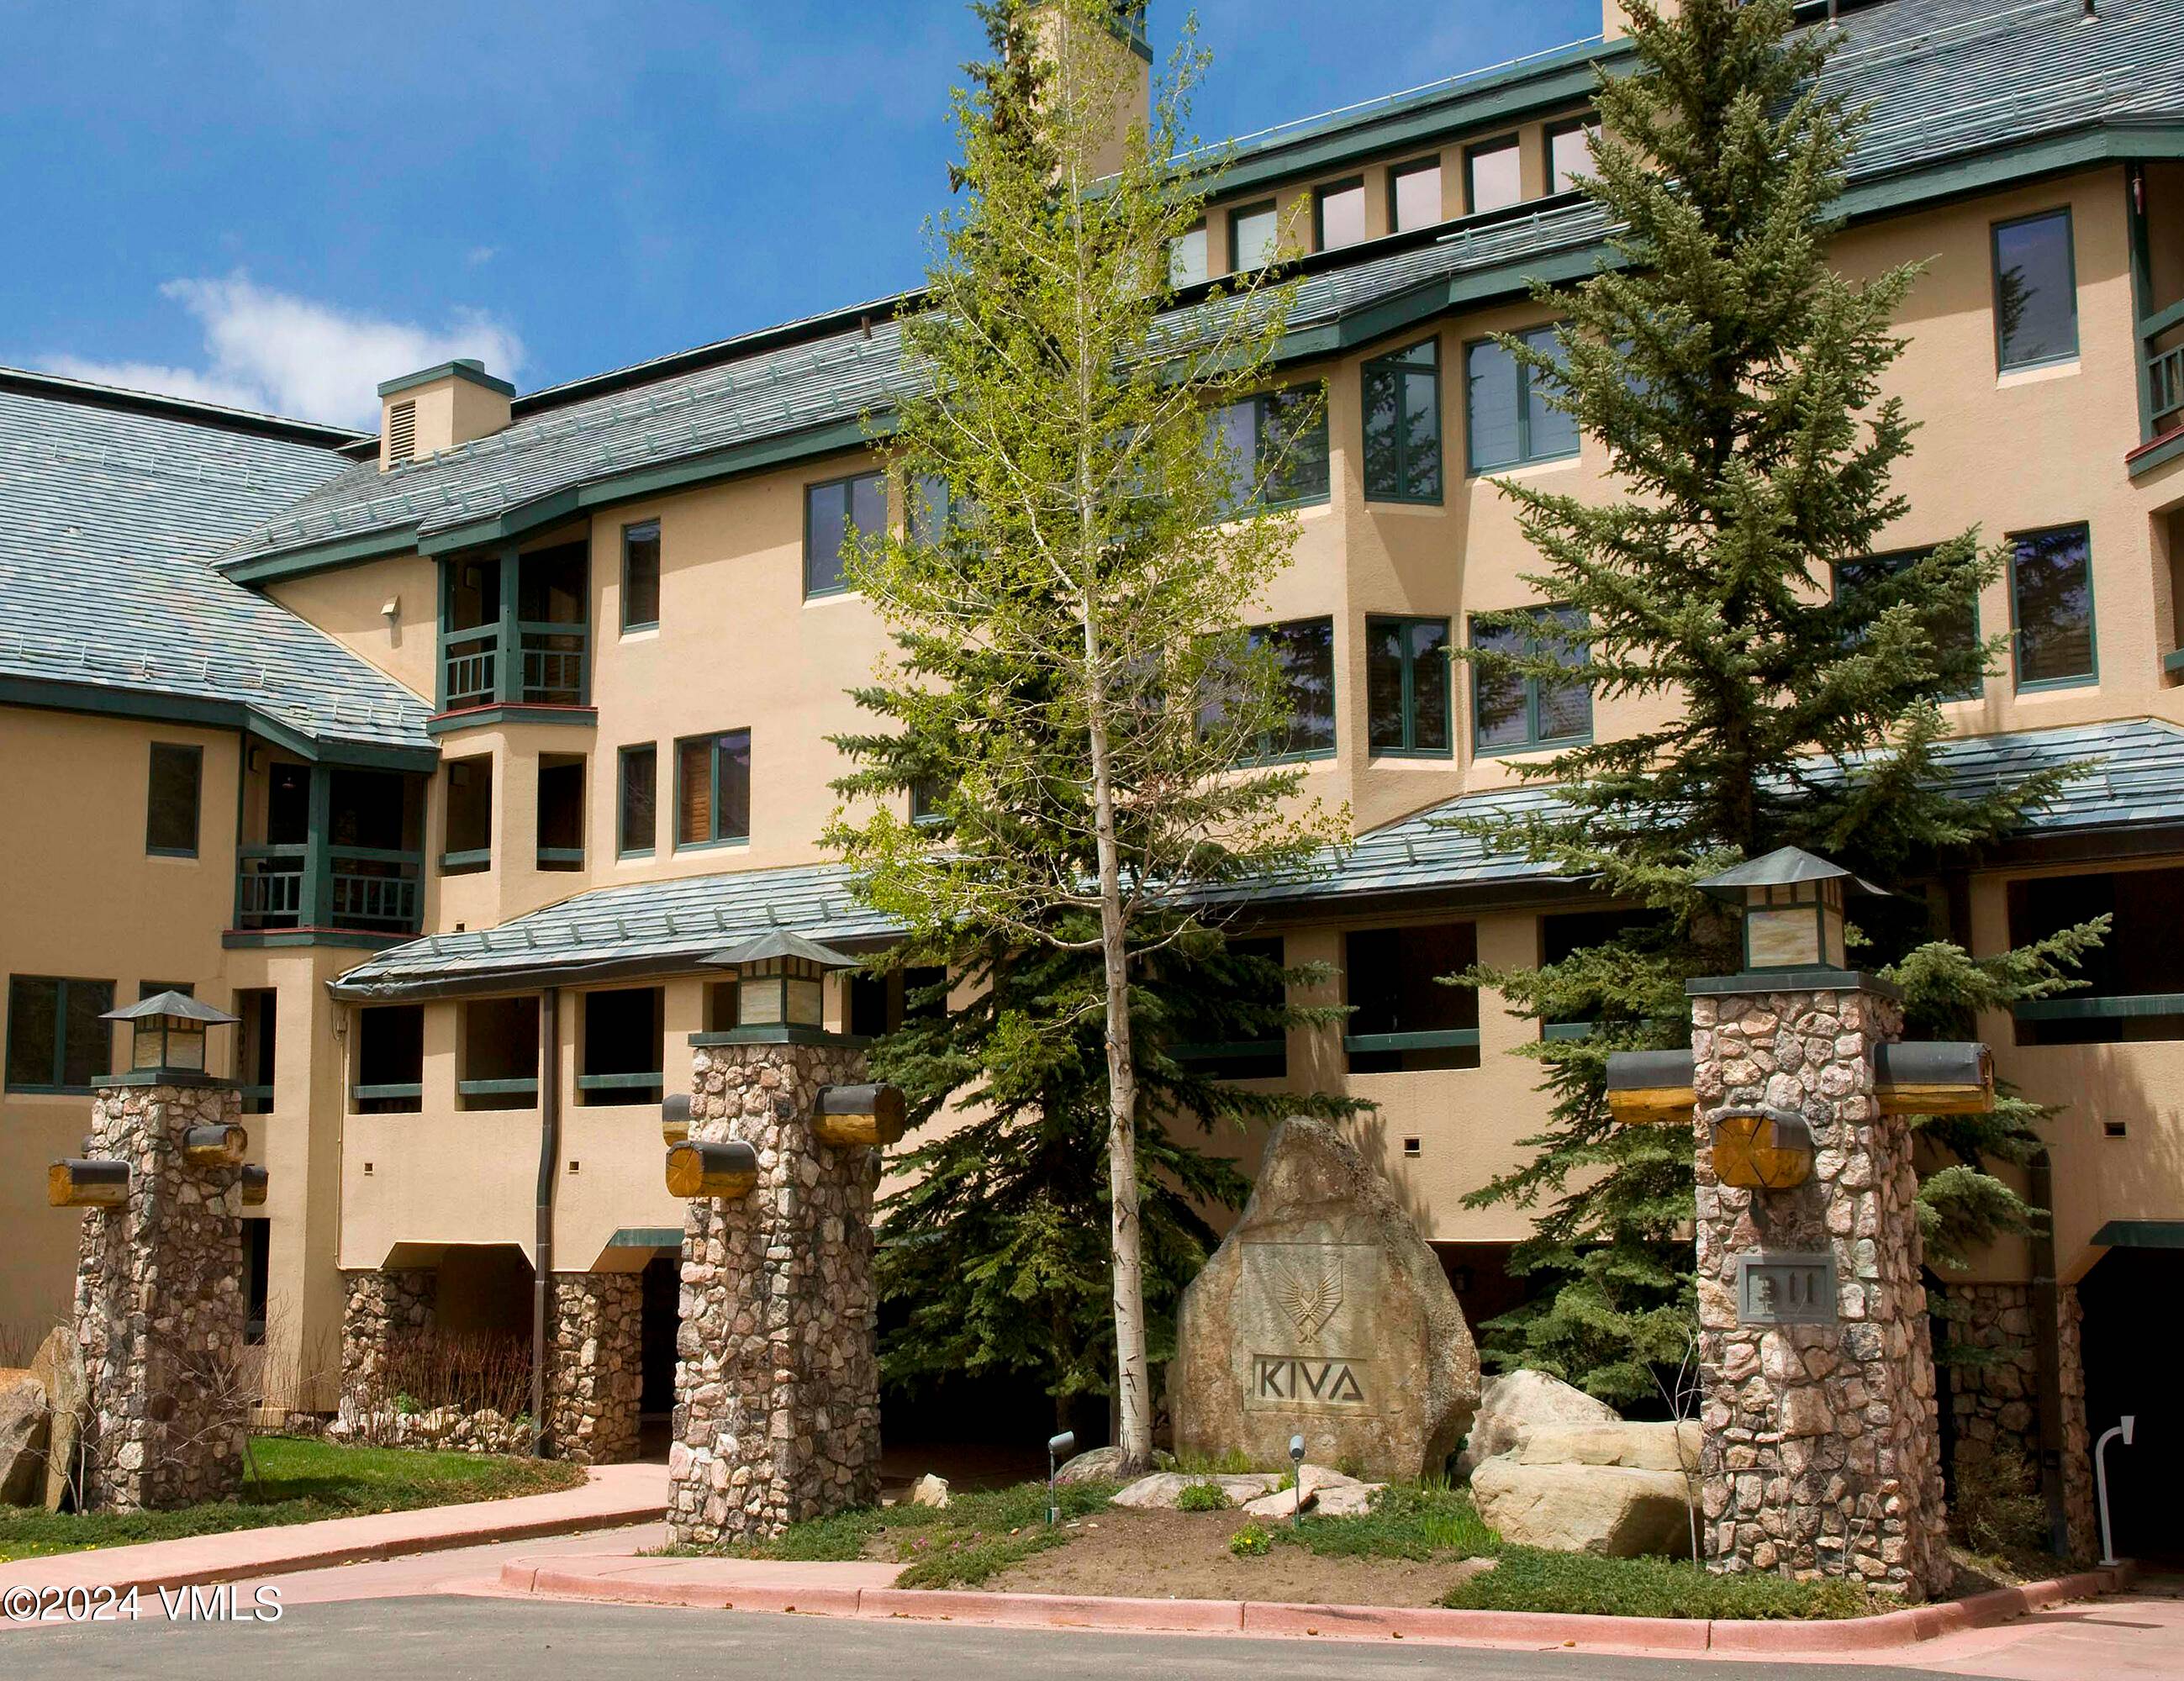 Discover the quintessential retreat at The Kiva, your cherished haven within the heart of Beaver Creek Resort.